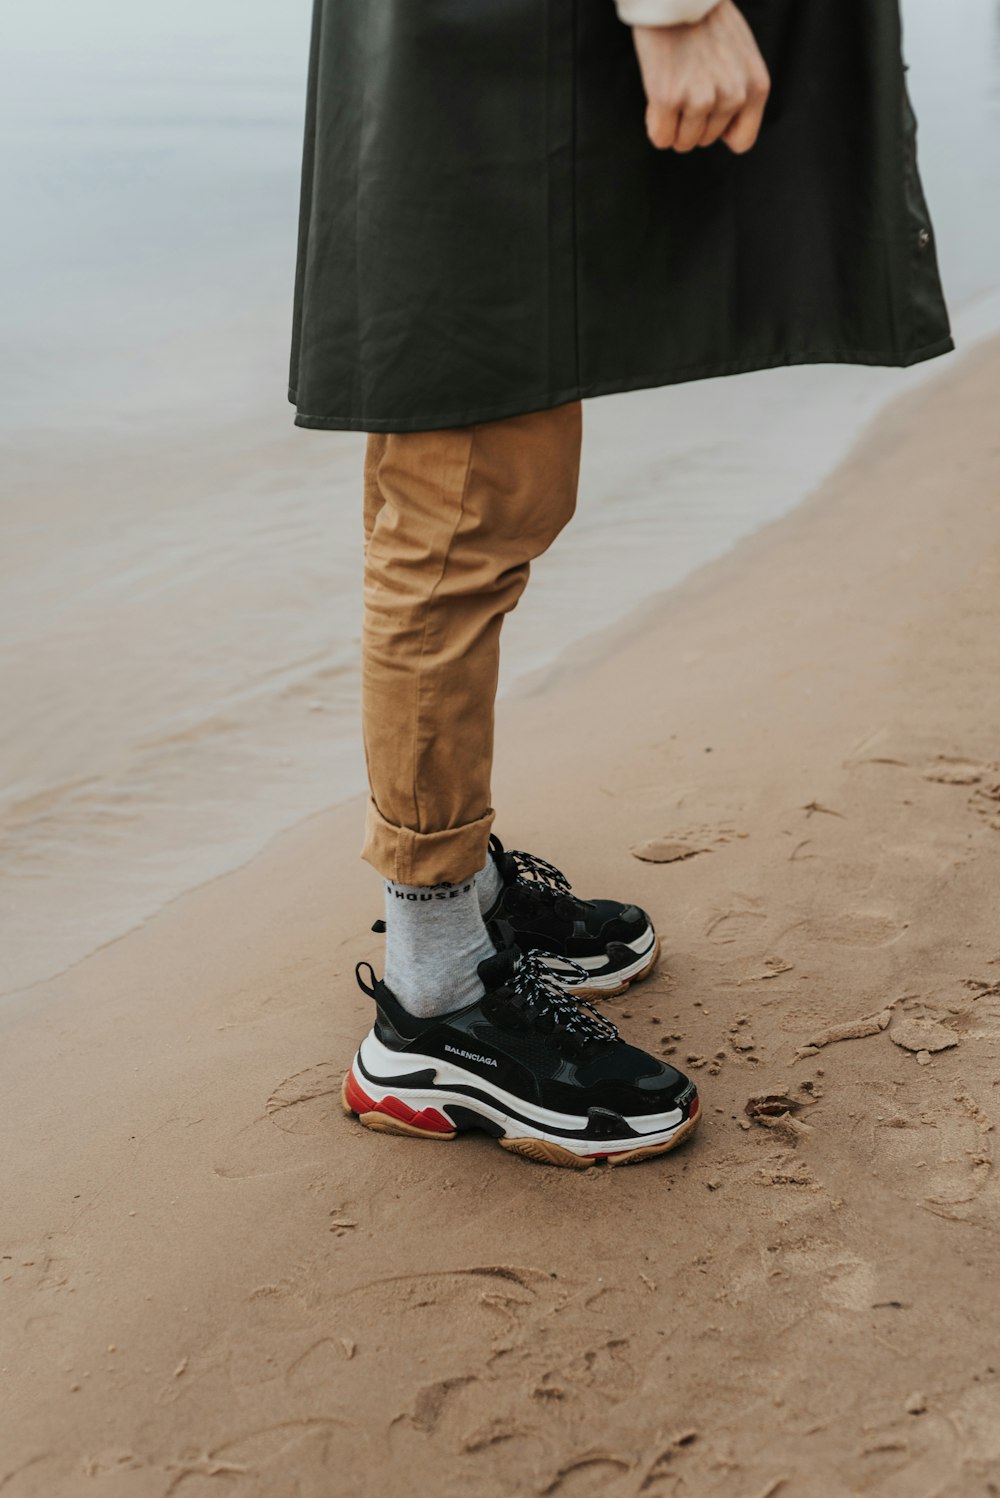 Person in black and white nike sneakers standing on brown sand during daytime – Free Fashion Image on